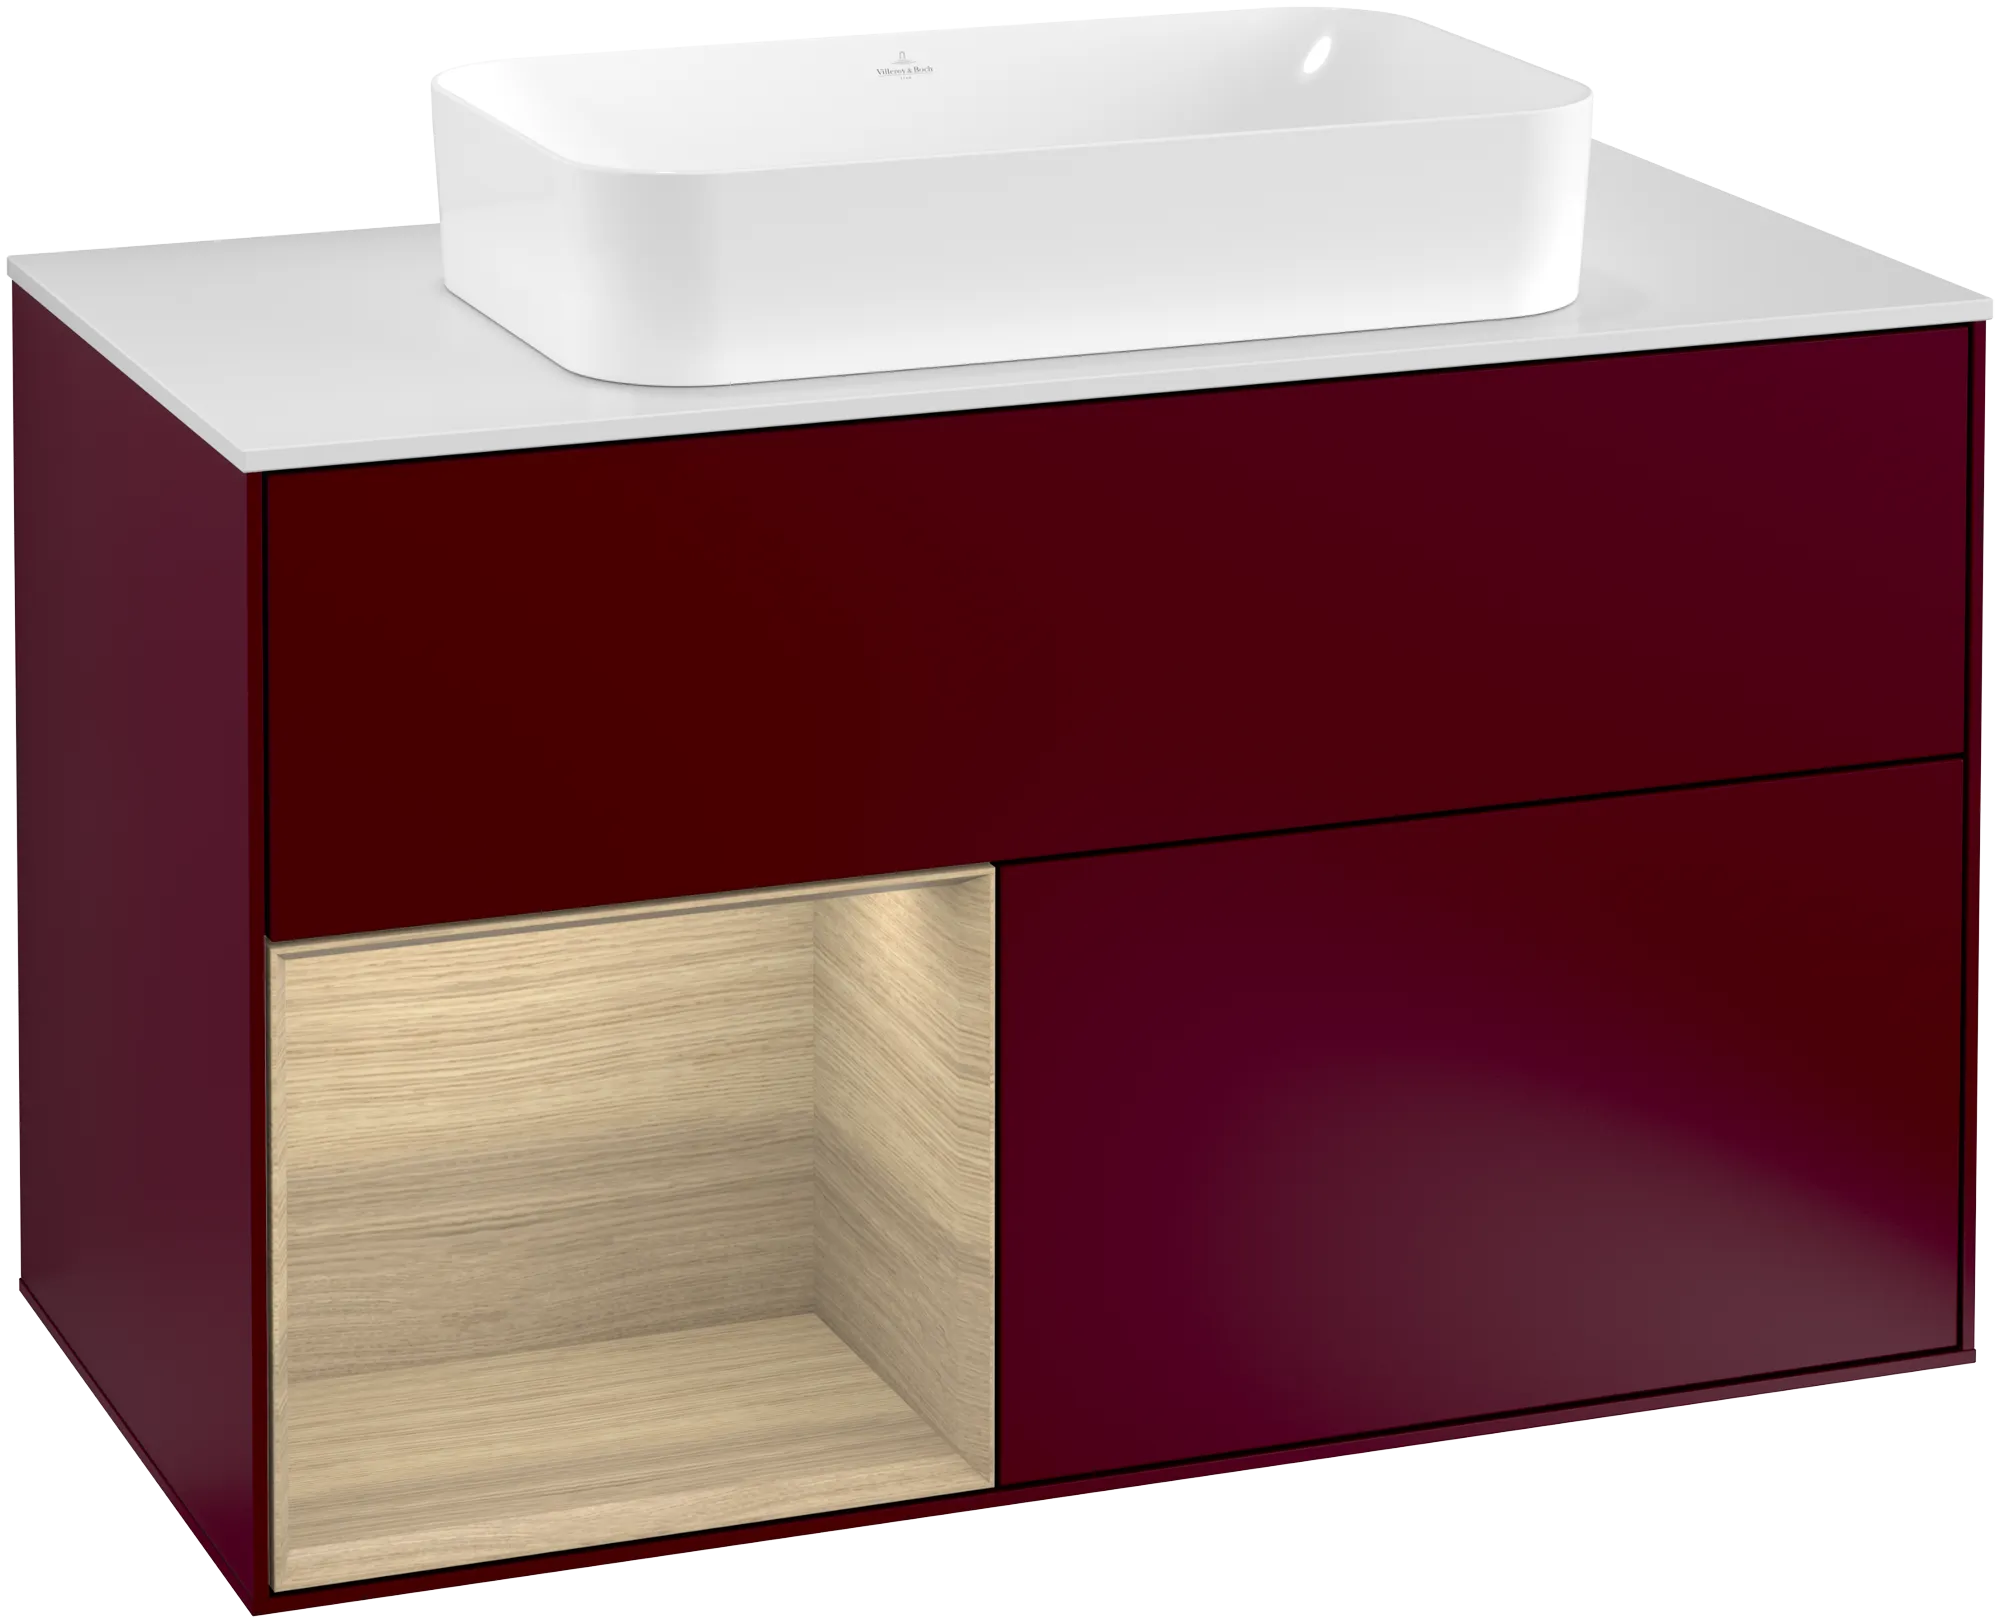 Picture of VILLEROY BOCH Finion Vanity unit, with lighting, 2 pull-out compartments, 1000 x 603 x 501 mm, Peony Matt Lacquer / Oak Veneer / Glass White Matt #G241PCHB